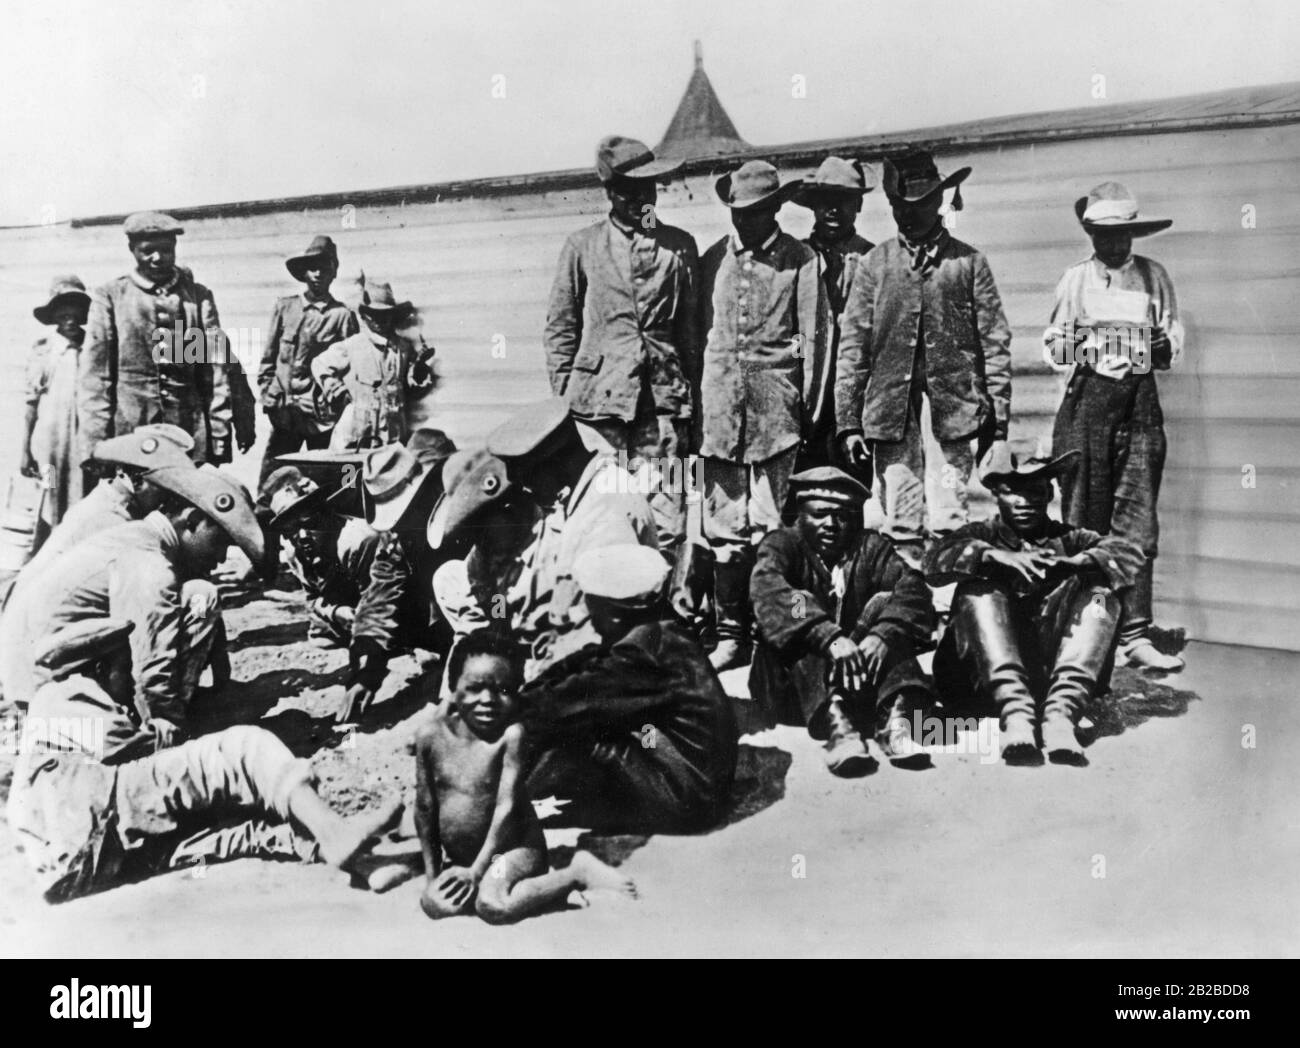 The members of the Witboi in South West Africa supported the German Schutztruppen at the beginning of the rebellions against the Herero, but revolted against German rule in October 1904 and contributed to the rebellion in the south of the colony. The photo shows the Witboi as fighters on the German side. Stock Photo